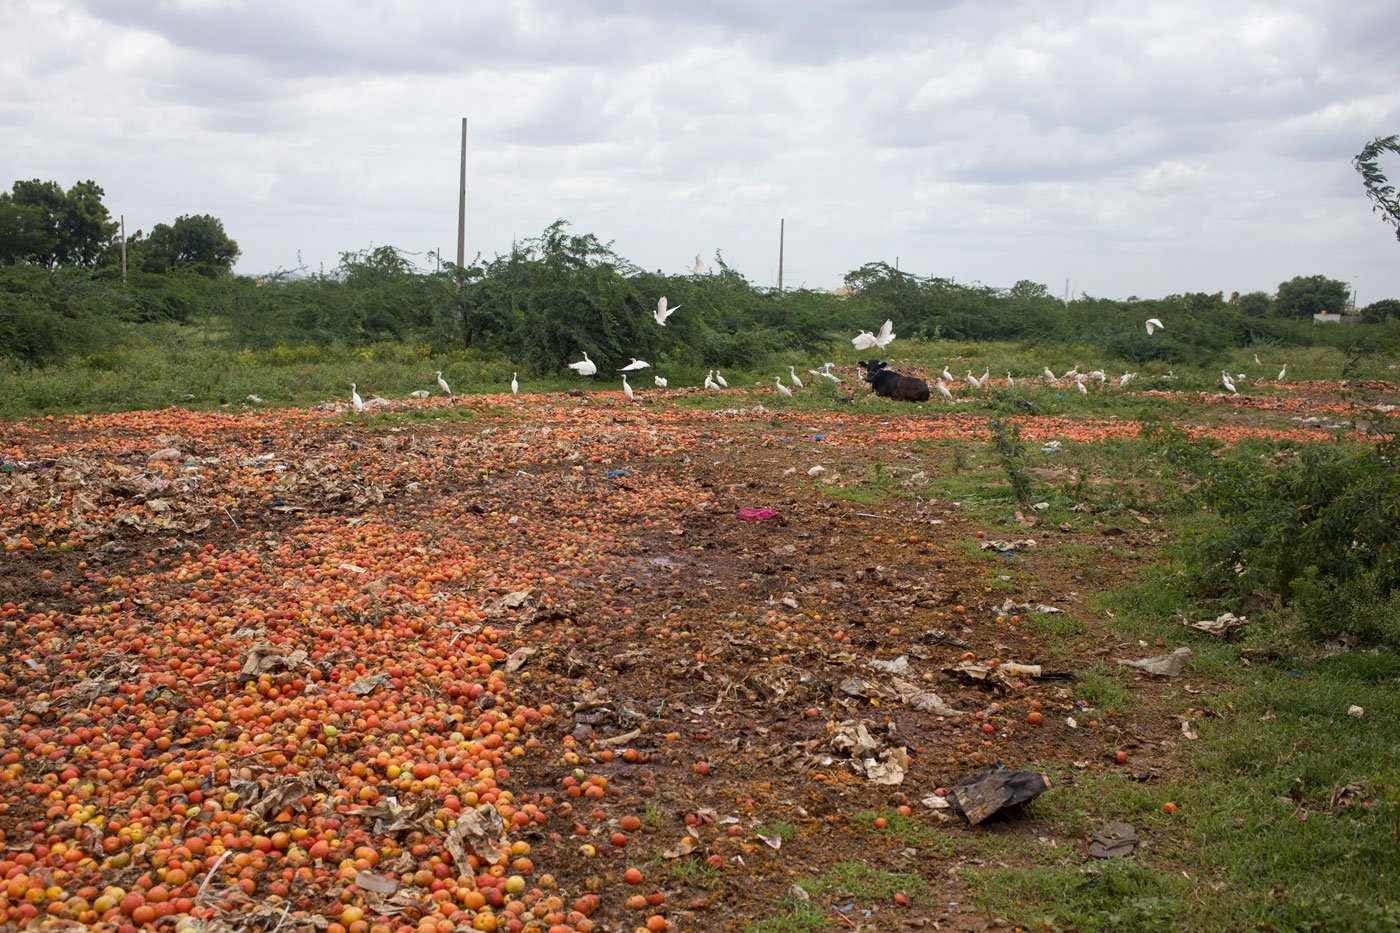 This field near the Anantapur tomato market yard serves as a dumping ground when prices dip